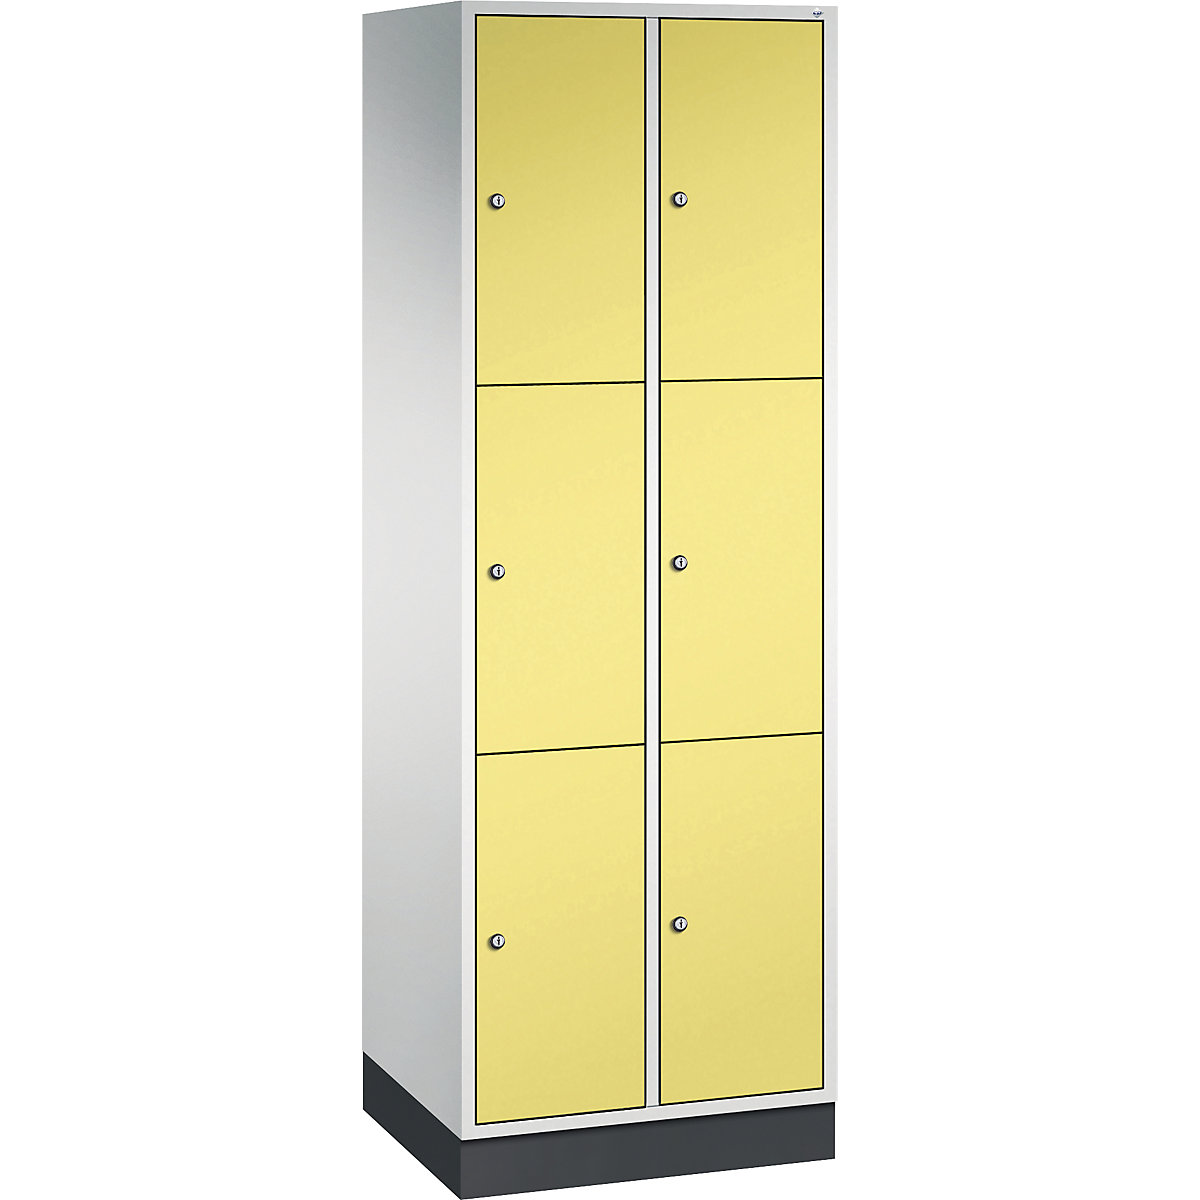 INTRO steel compartment locker, compartment height 580 mm – C+P, WxD 620 x 500 mm, 6 compartments, light grey body, sulphur yellow doors